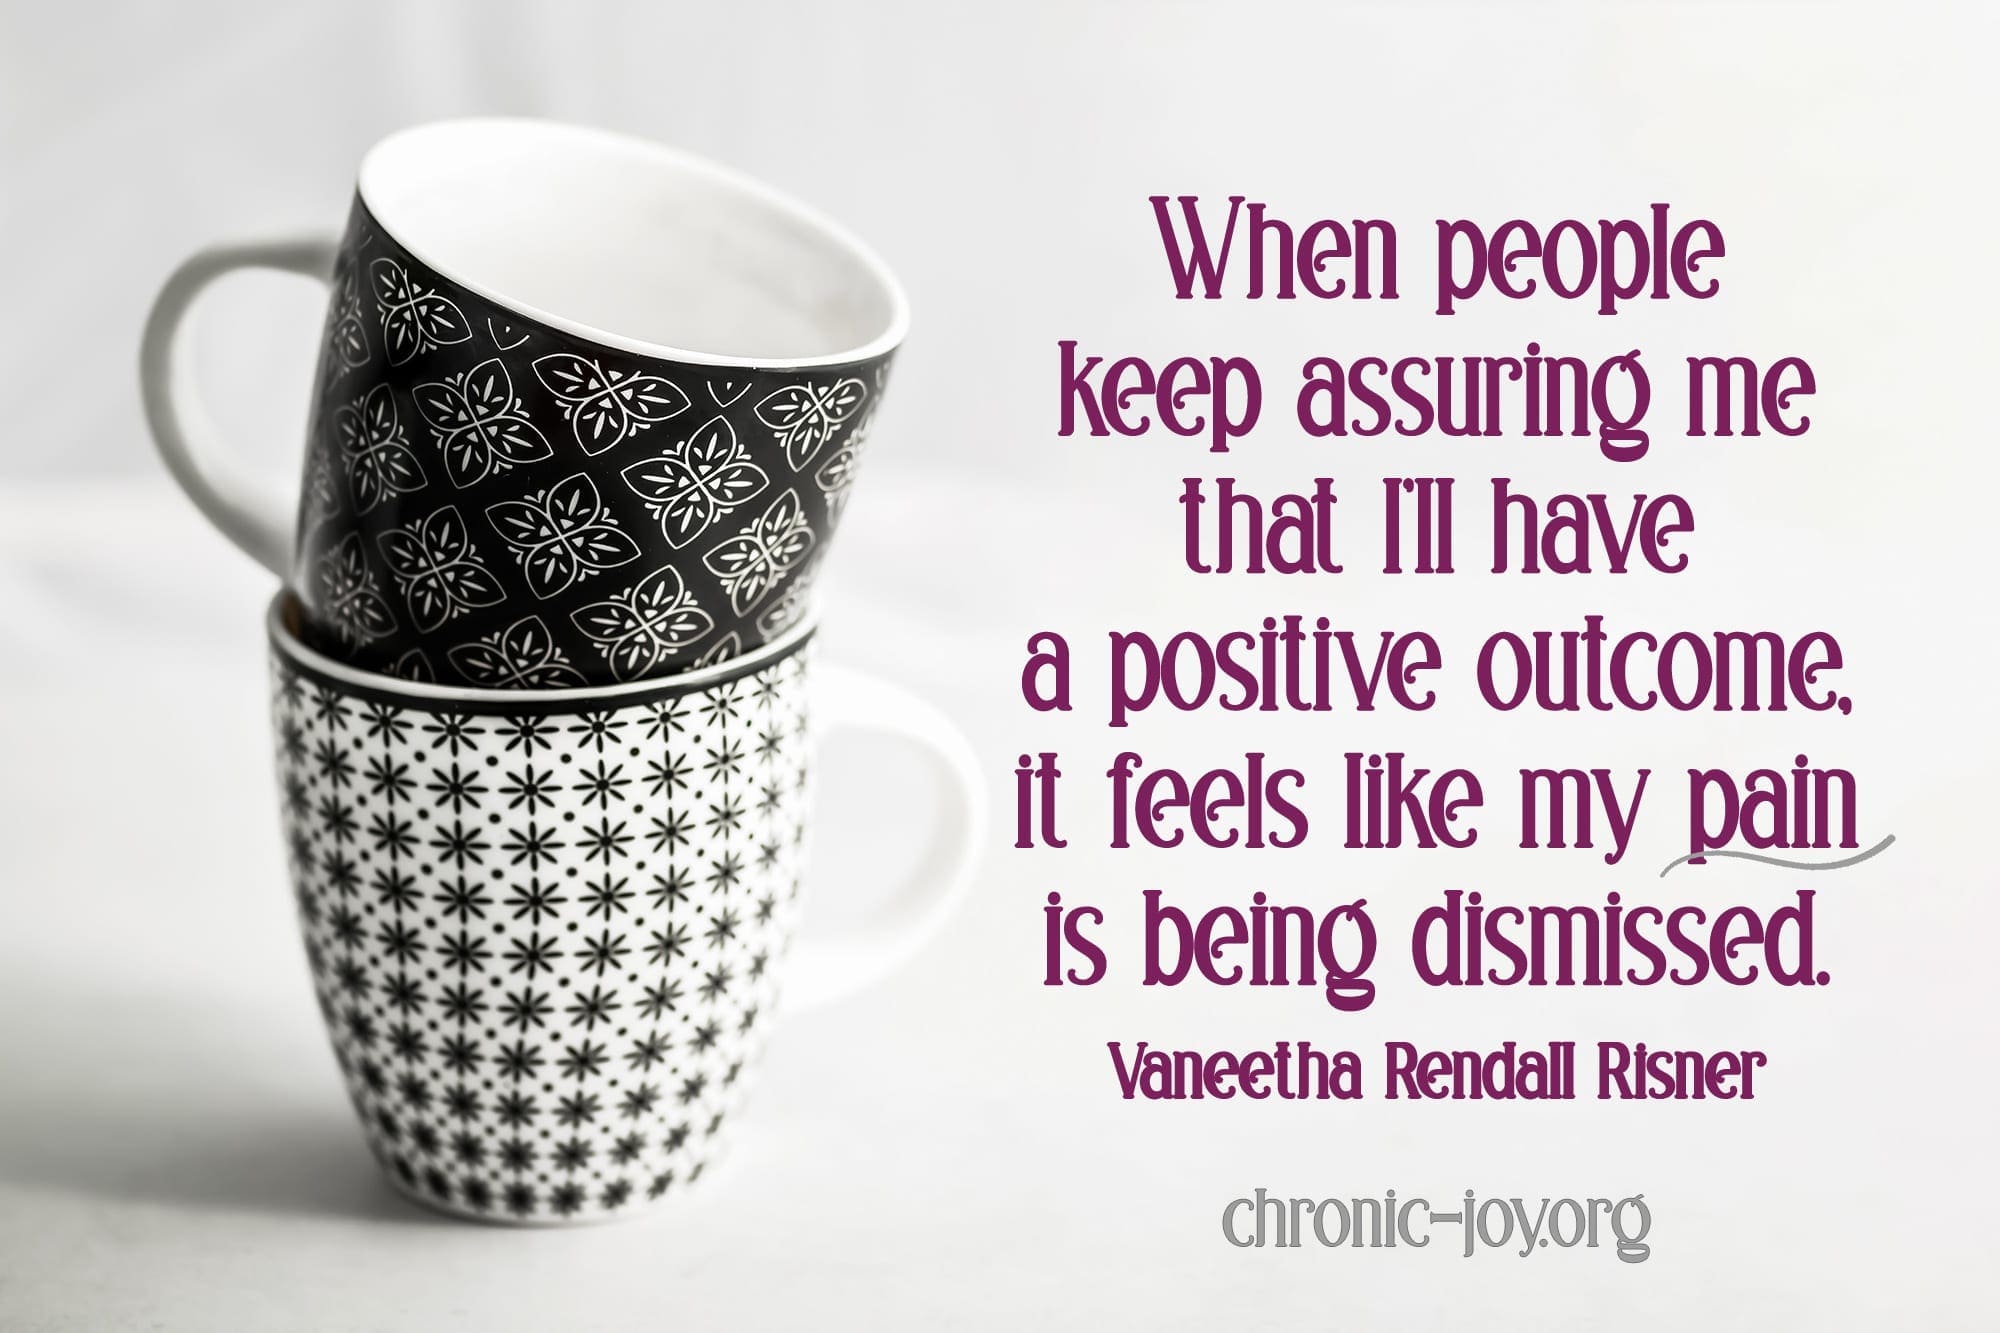 "When people keep assuring me that I’ll have a positive outcome, it feels like my pain is being dismissed." Vaneetha Rendall Risner